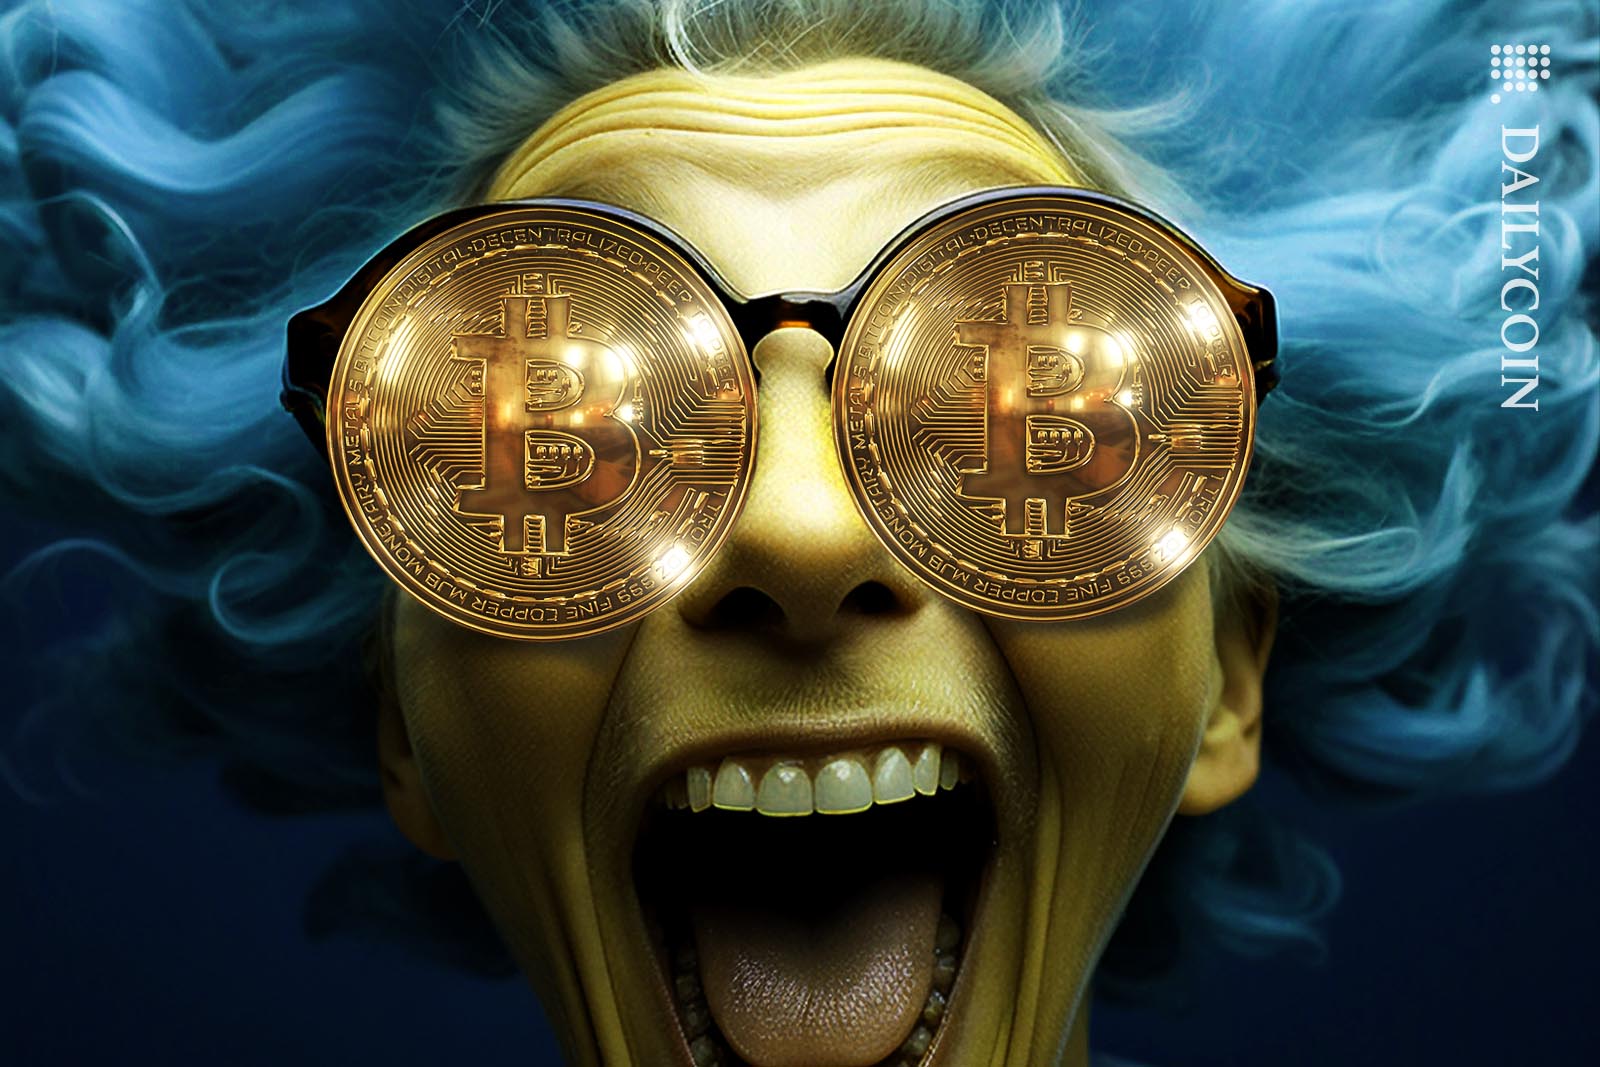 Crazy looking blue haired person with Bitcoin glasses.